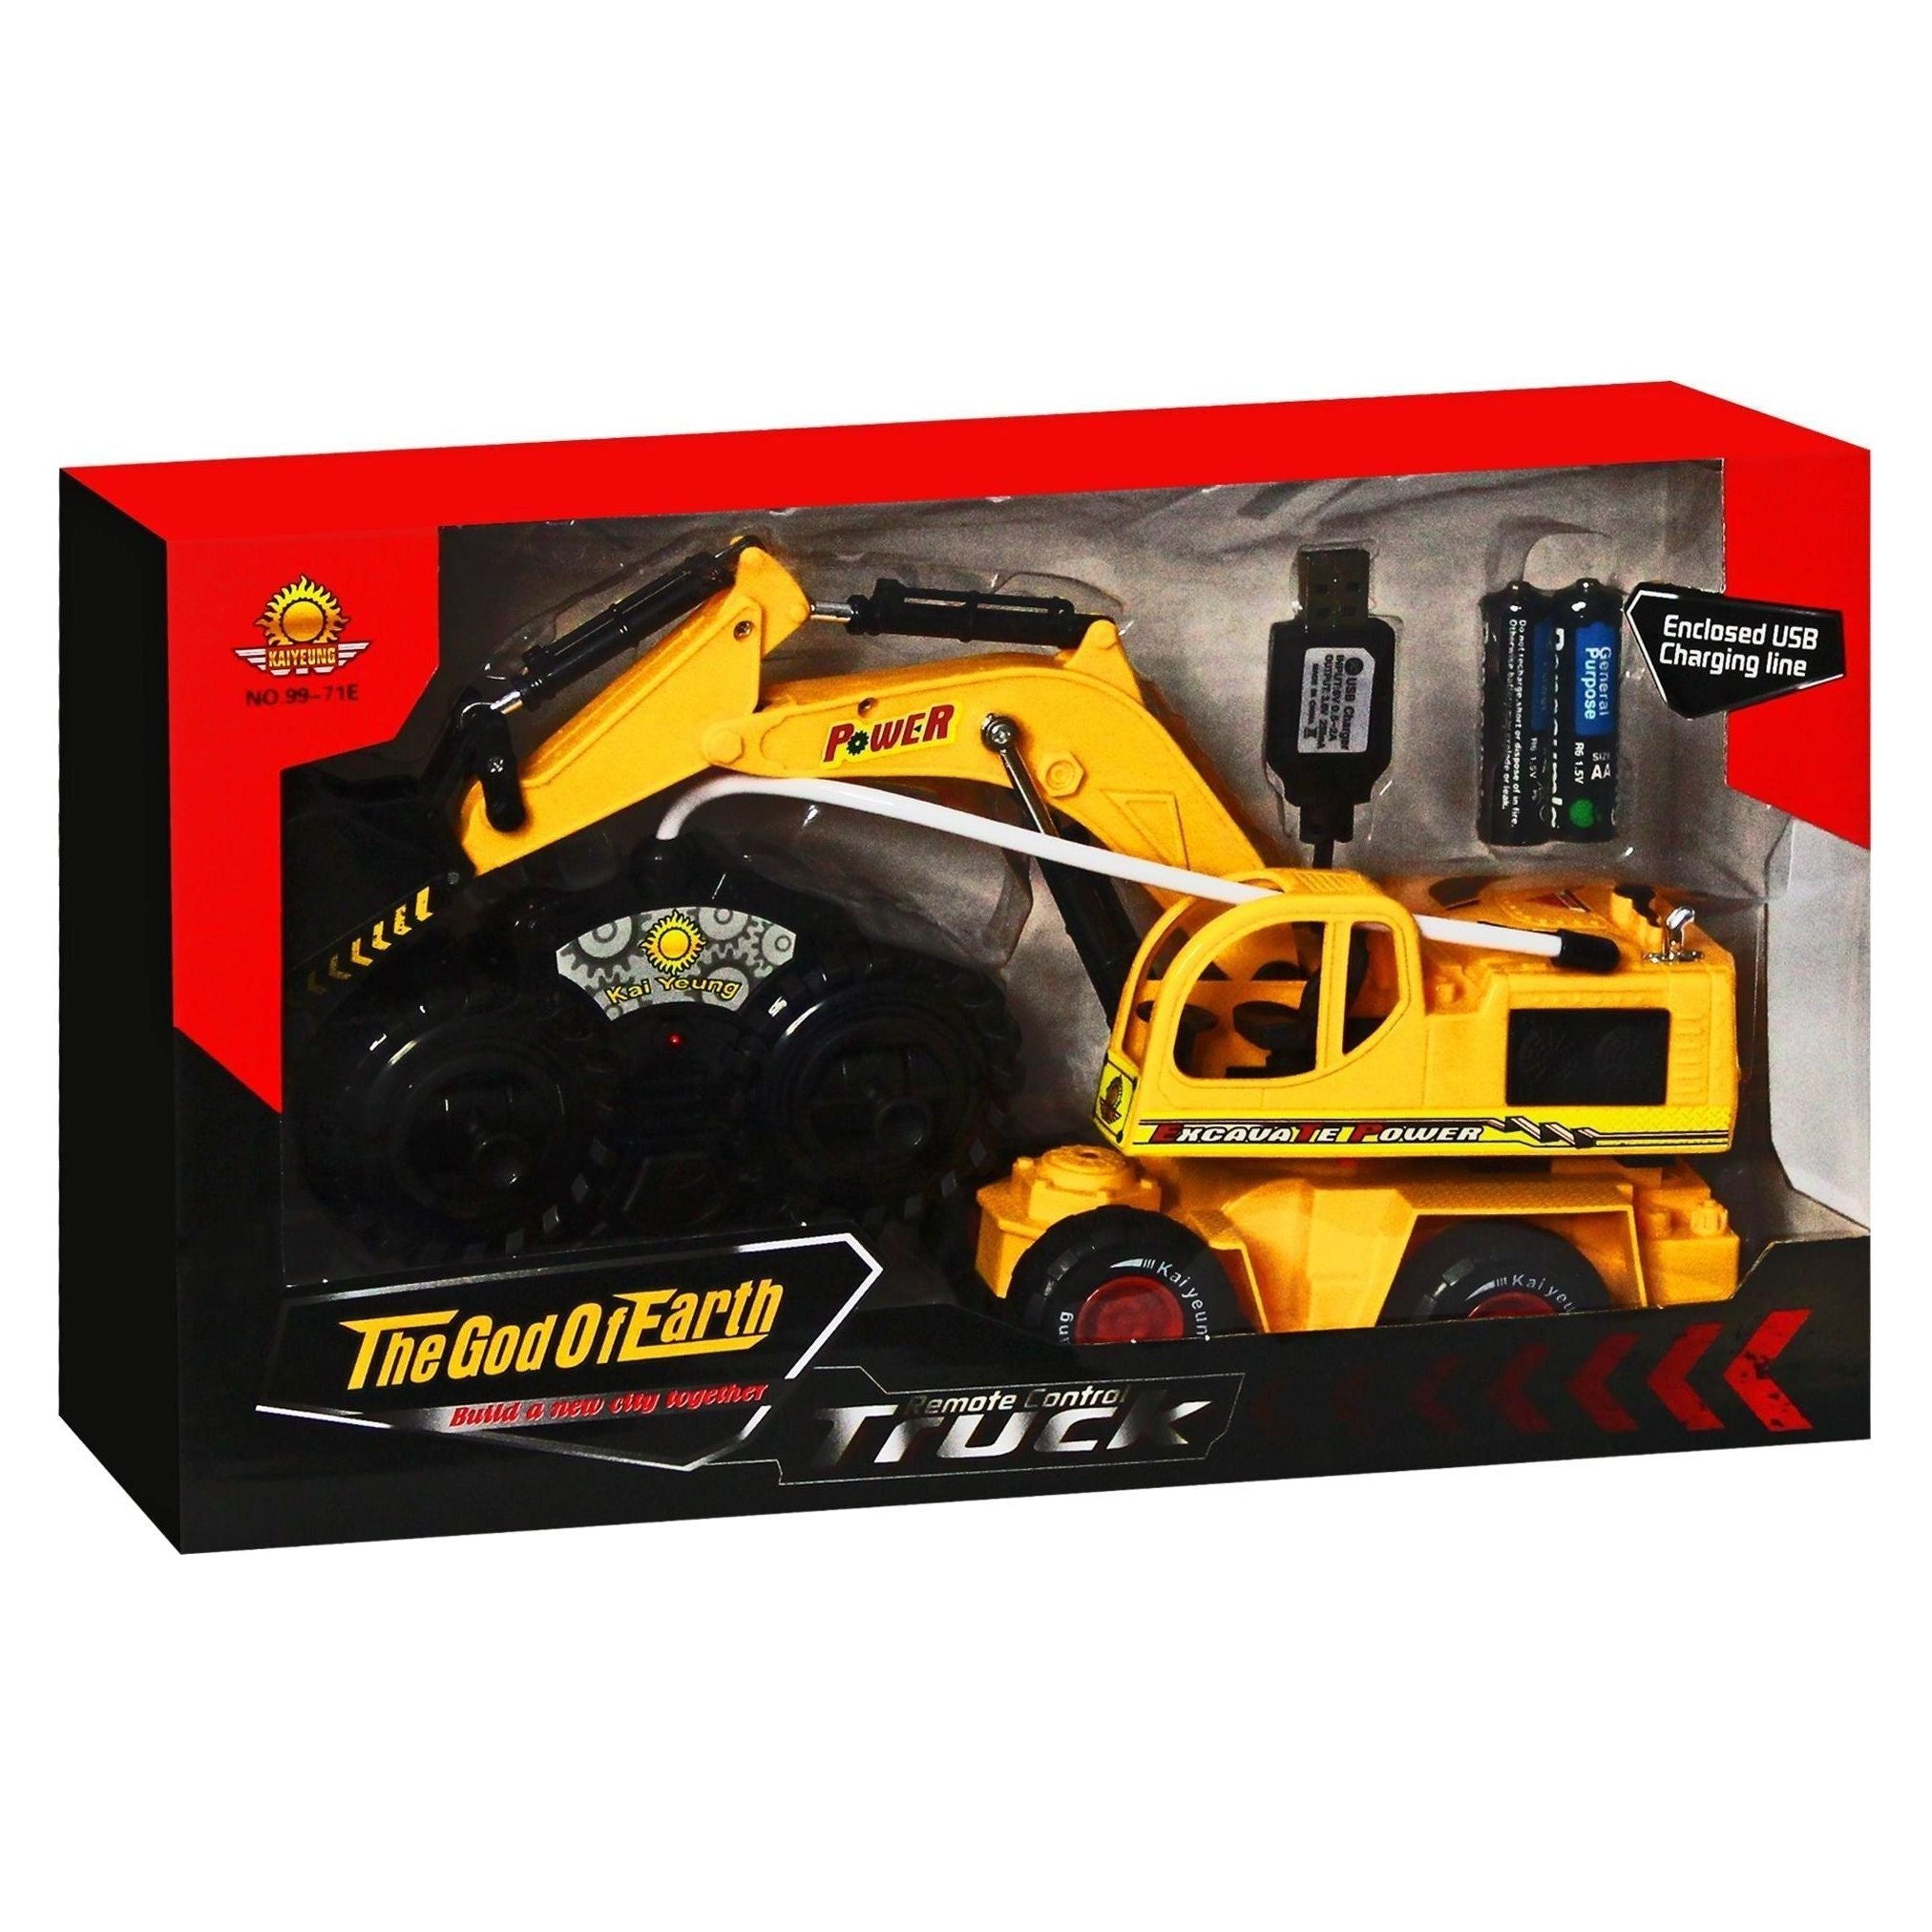 The God Of Earth Remote Control Truck Excavator Enclosed USB Kai Yeung - BumbleToys - 6+ Years, 8-13 Years, Boys, Cars, Collectible Vehicles, Toy House, Truck